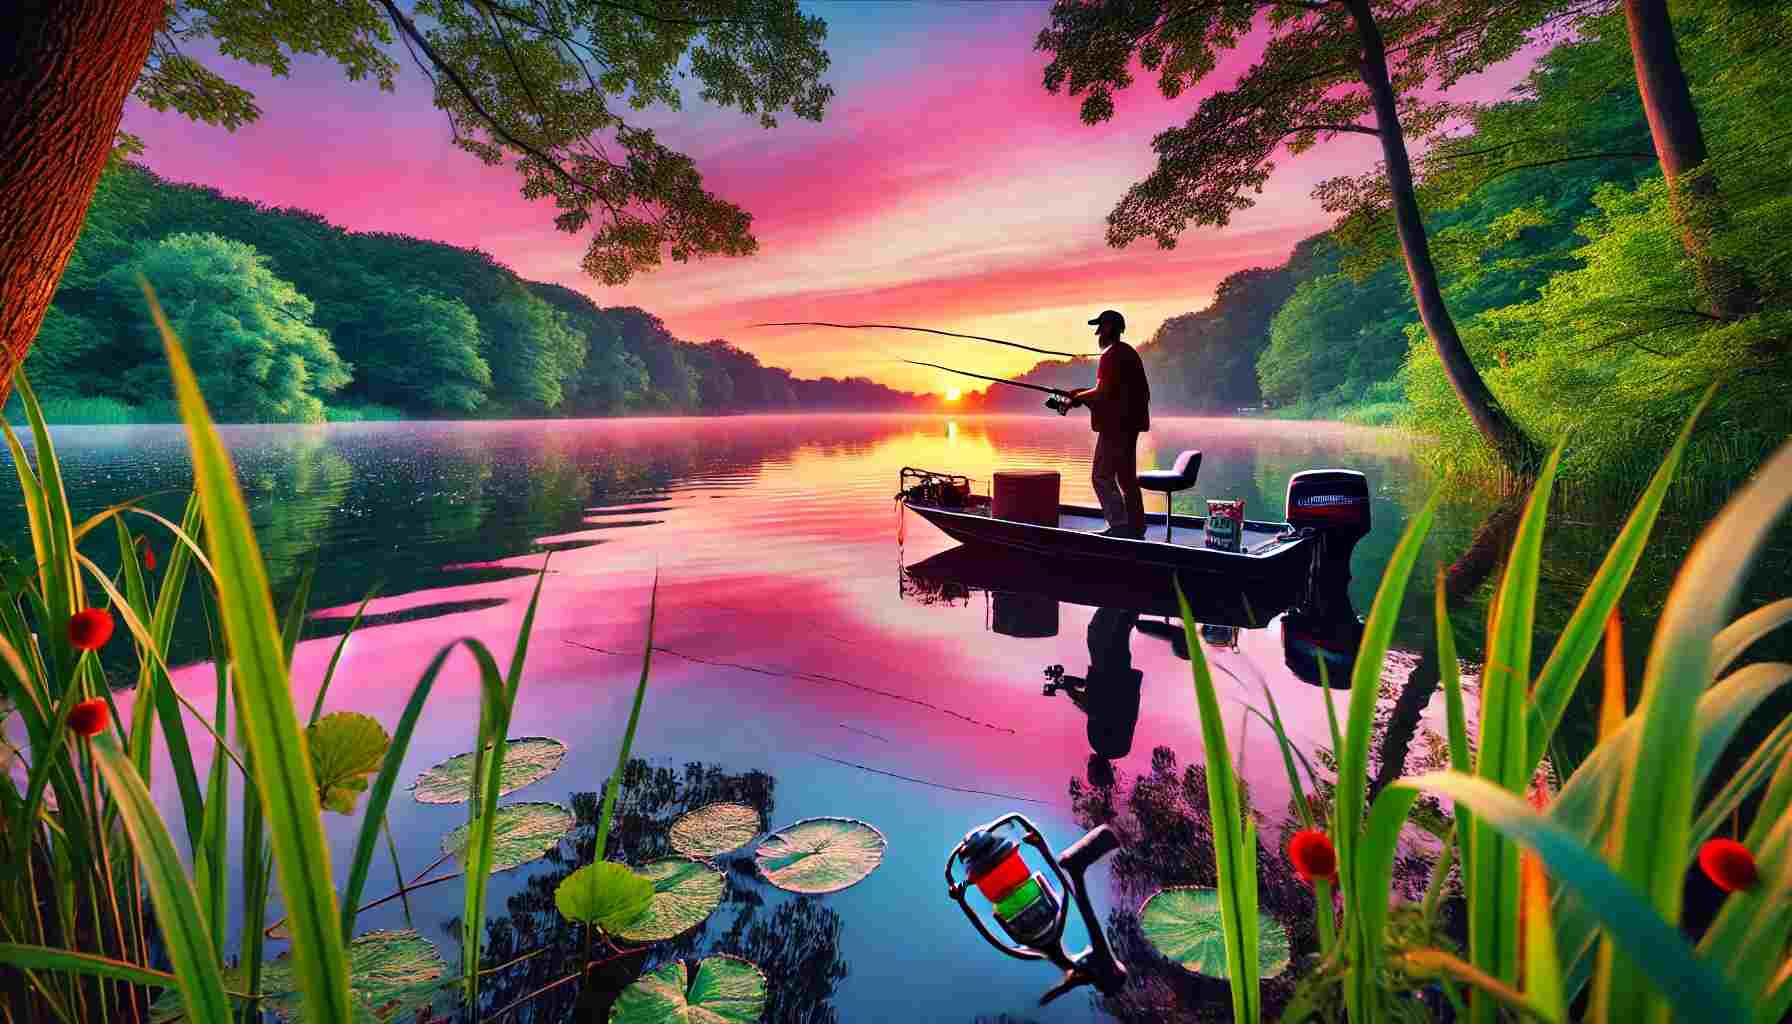 A serene lake at dawn with an angler in a small boat casting a fishing line. The lake is surrounded by lush greenery, and the sky is painted in shades of pink and orange. The water is calm, reflecting the beautiful colors of the sky, capturing the peaceful and promising start of a productive day of bass fishing.